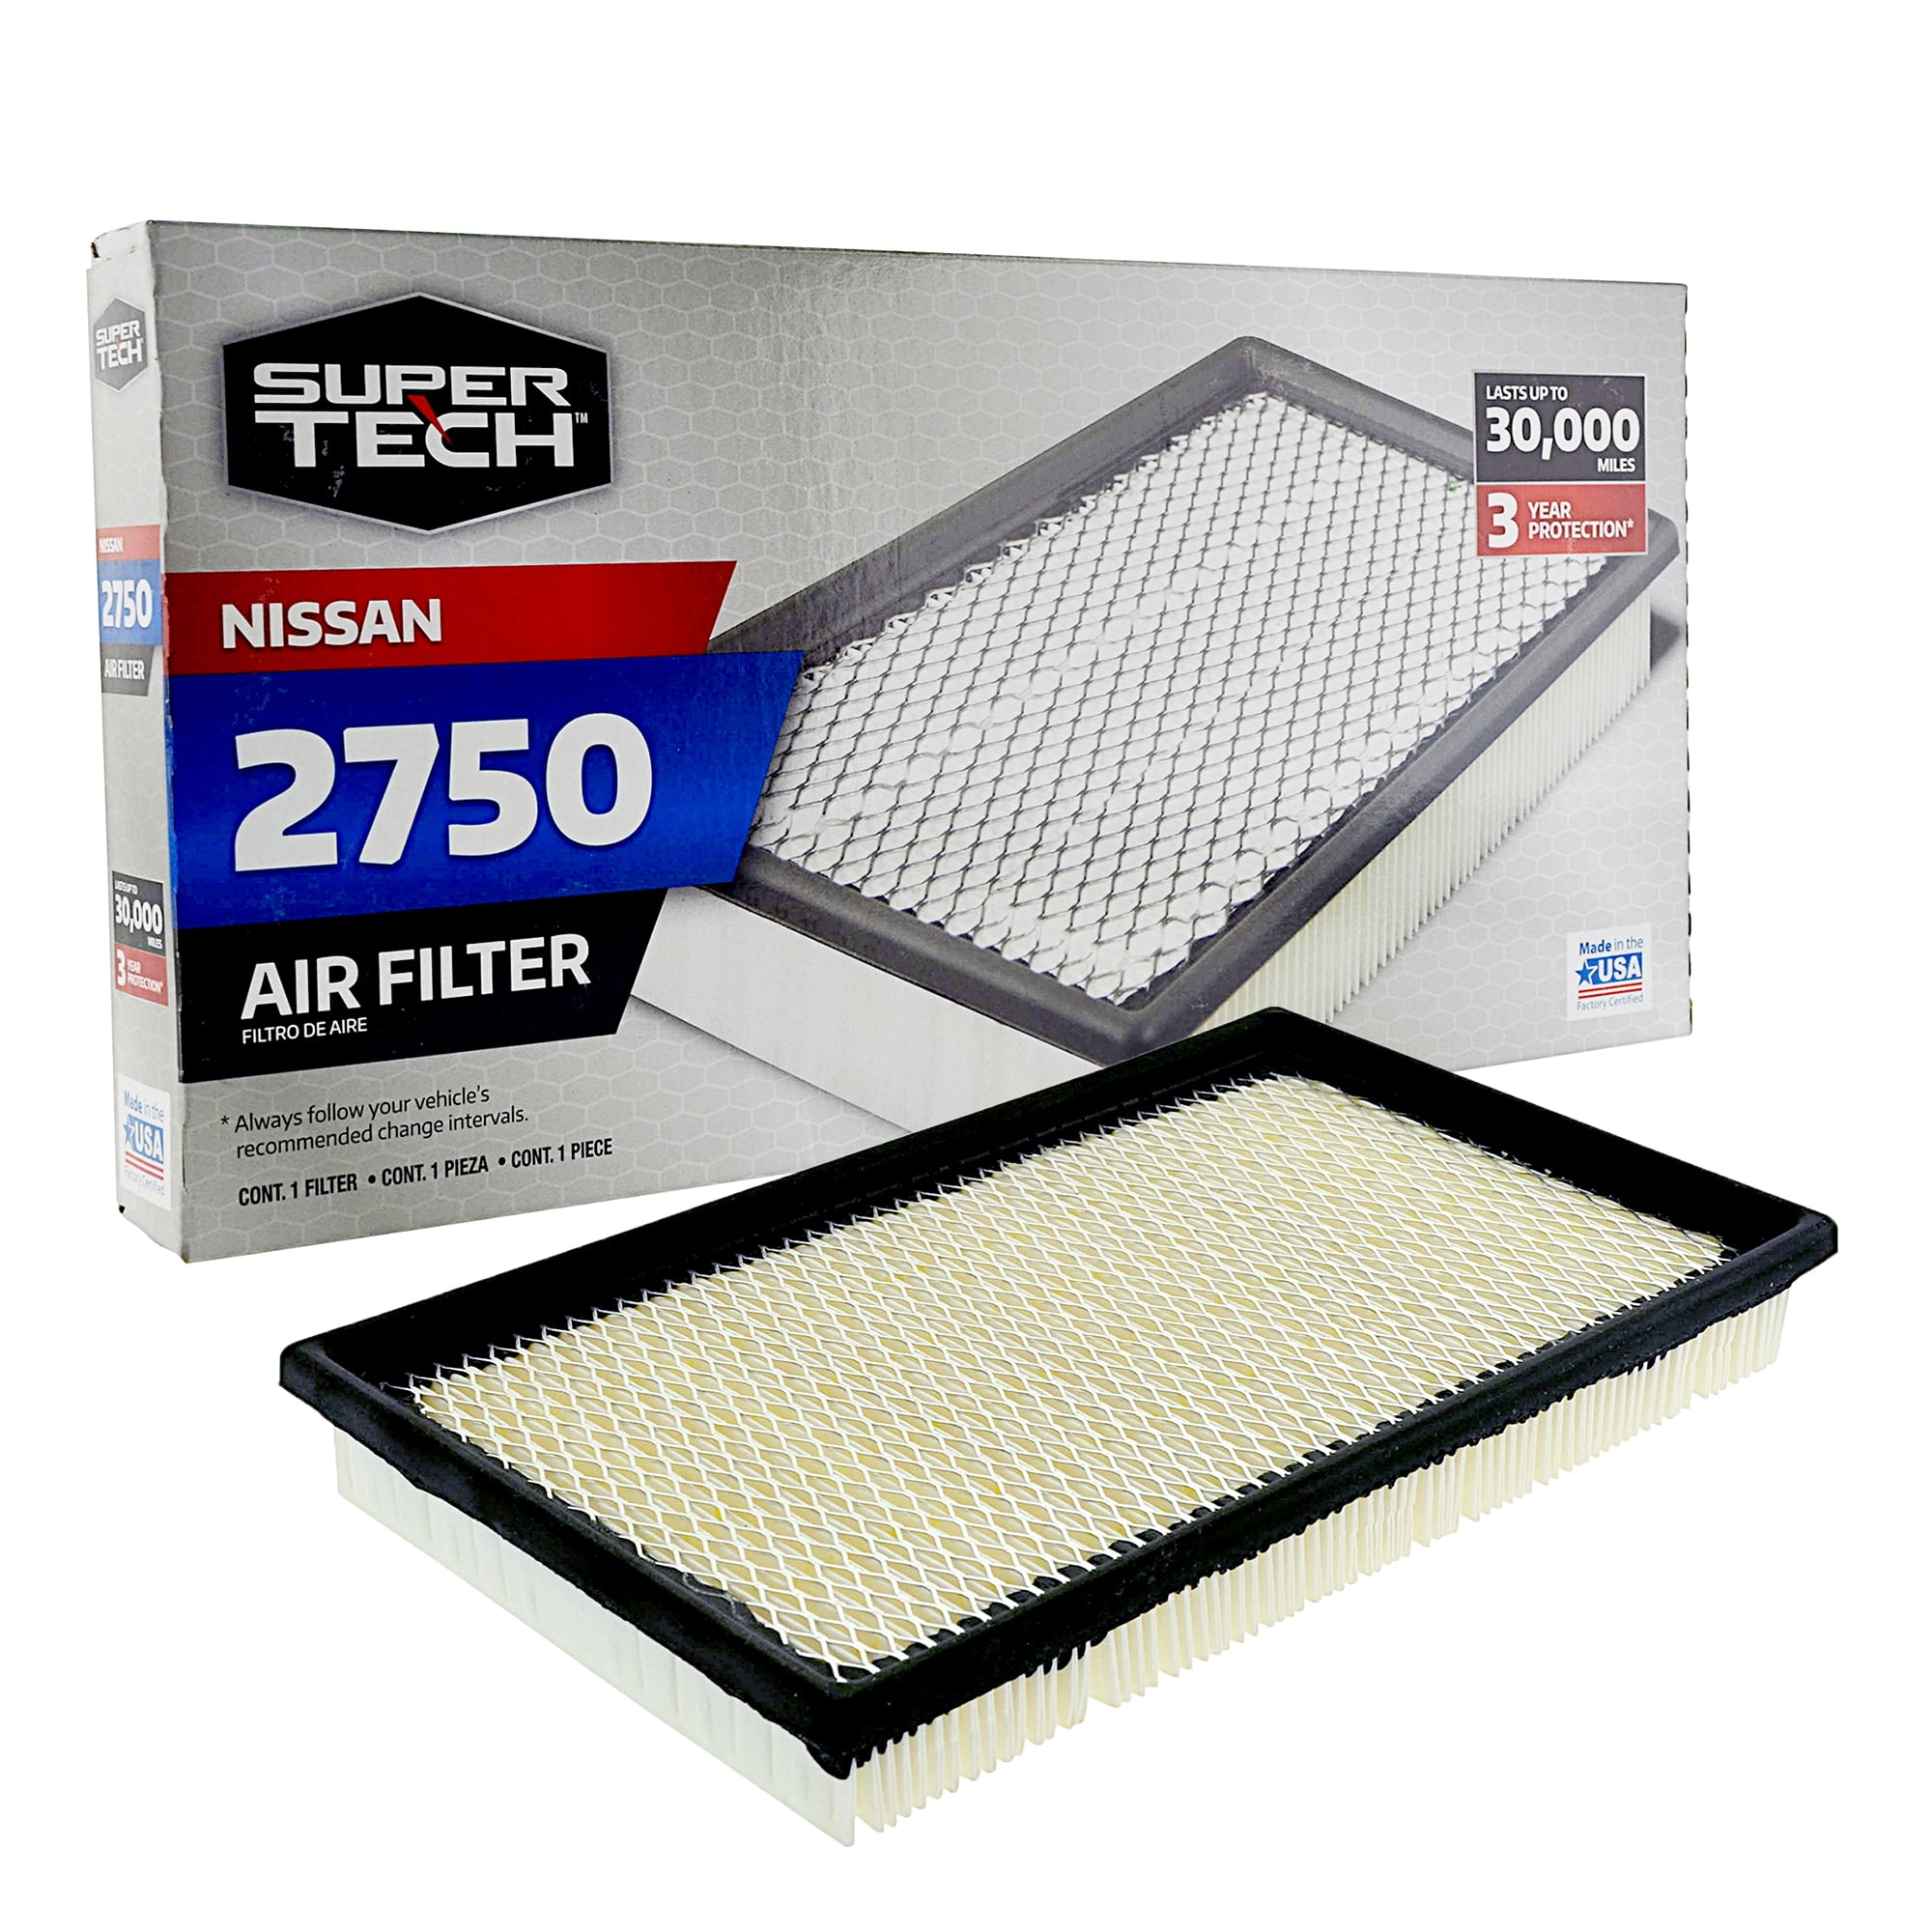 10x sct filtro aire sb 3250 Air Filter